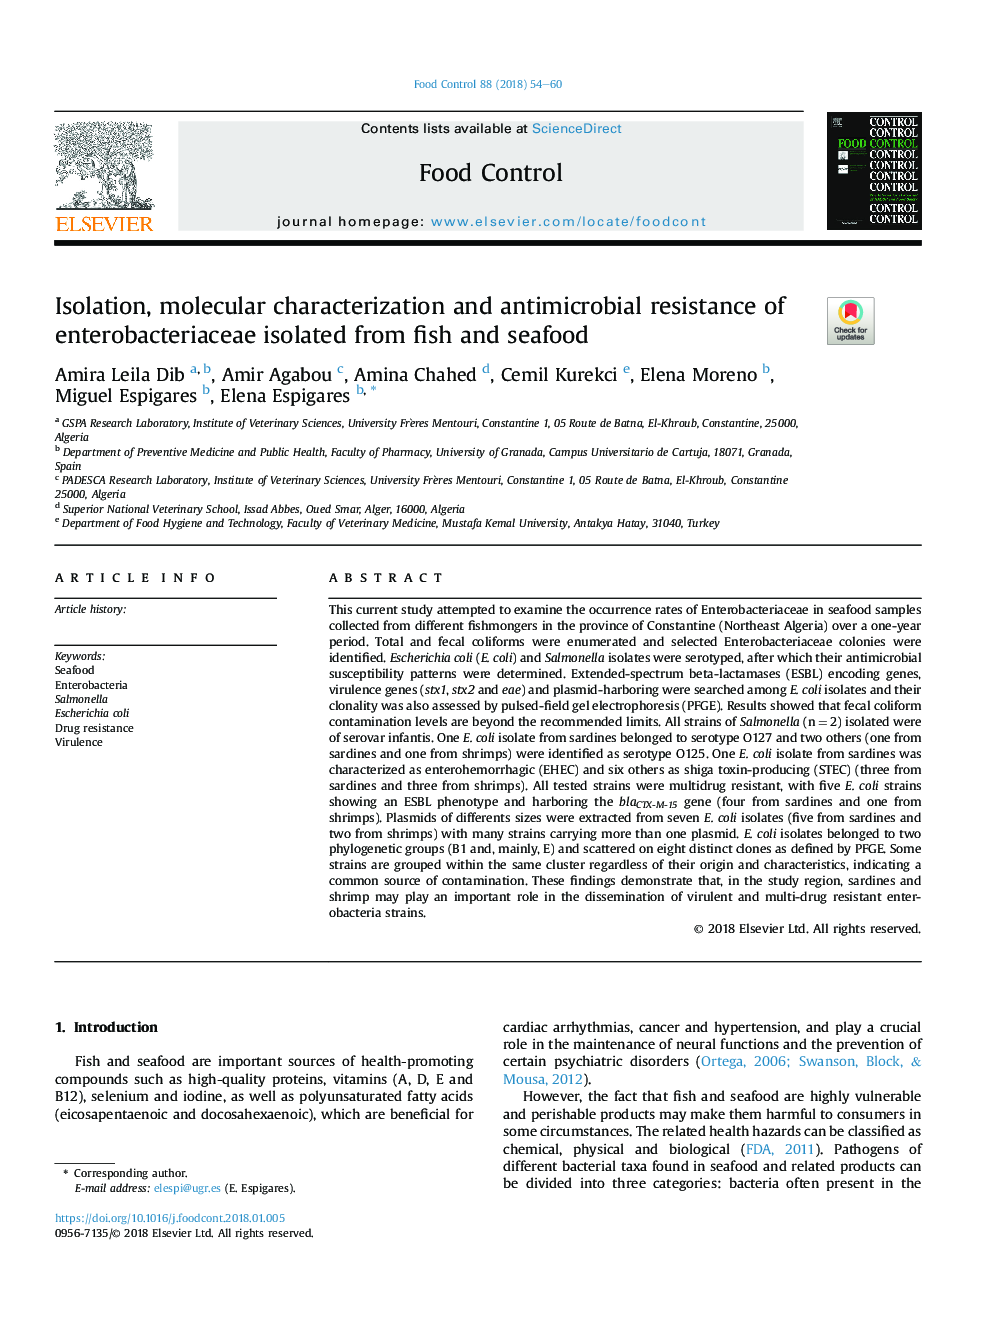 Isolation, molecular characterization and antimicrobial resistance of enterobacteriaceae isolated from fish and seafood